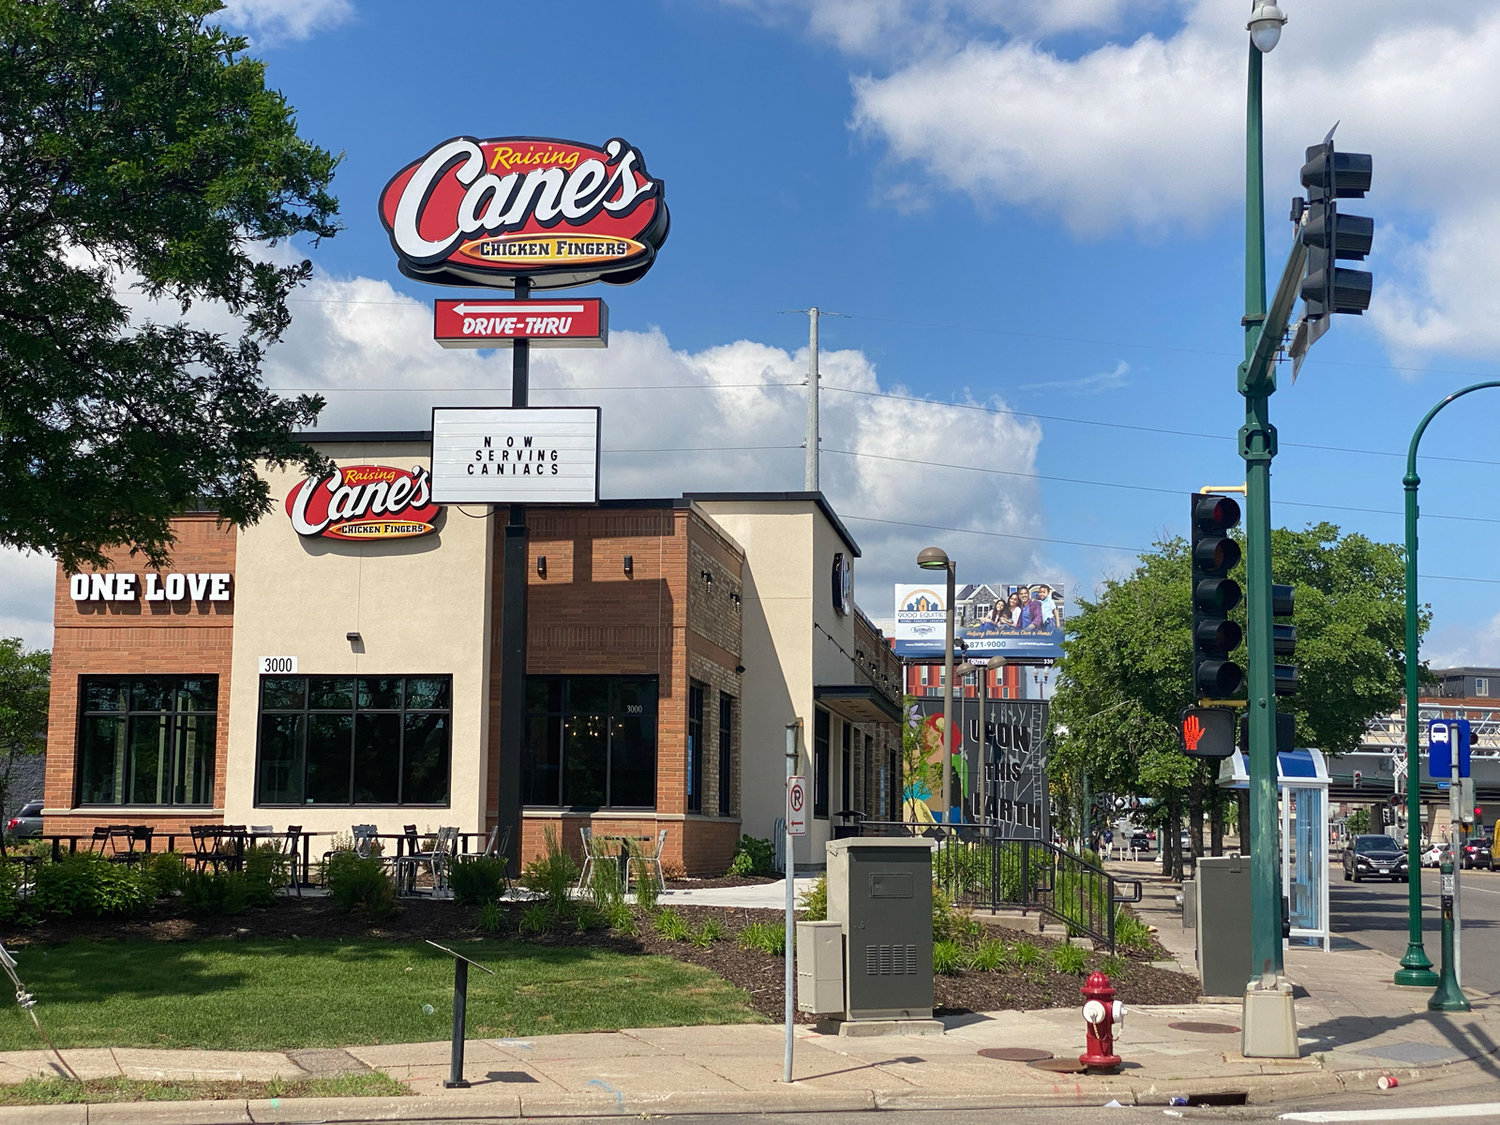 Raising Cane's rebuilt where the Arby's used to sit and reopened in 2021. (Photo by Tesha M. Christensen)